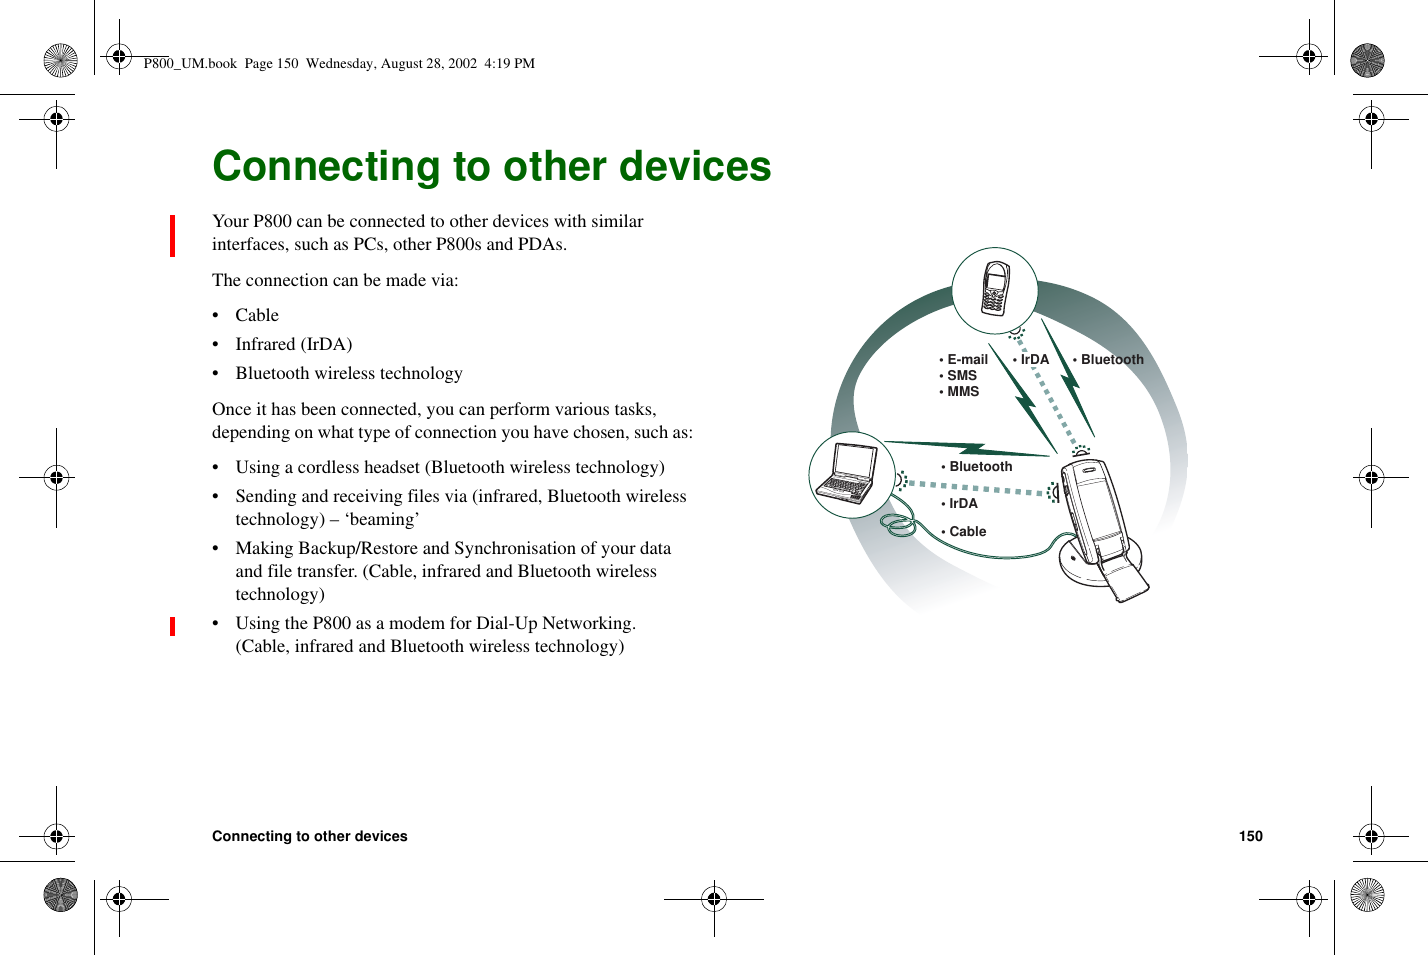 Connecting to other devices 150Connecting to other devicesYour P800 can be connected to other devices with similarinterfaces, such as PCs, other P800s and PDAs.The connection can be made via:•Cable• Infrared (IrDA)• Bluetooth wireless technologyOnce it has been connected, you can perform various tasks,depending on what type of connection you have chosen, such as:• Using a cordless headset (Bluetooth wireless technology)• Sending and receiving files via (infrared, Bluetooth wirelesstechnology) – ‘beaming’• Making Backup/Restore and Synchronisation of your dataand file transfer. (Cable, infrared and Bluetooth wirelesstechnology)• Using the P800 as a modem for Dial-Up Networking.(Cable, infrared and Bluetooth wireless technology)• Bluetooth• E-mail• SMS• MMS• Bluetooth• Cable• IrDA• IrDAP800_UM.book Page 150 Wednesday, August 28, 2002 4:19 PM